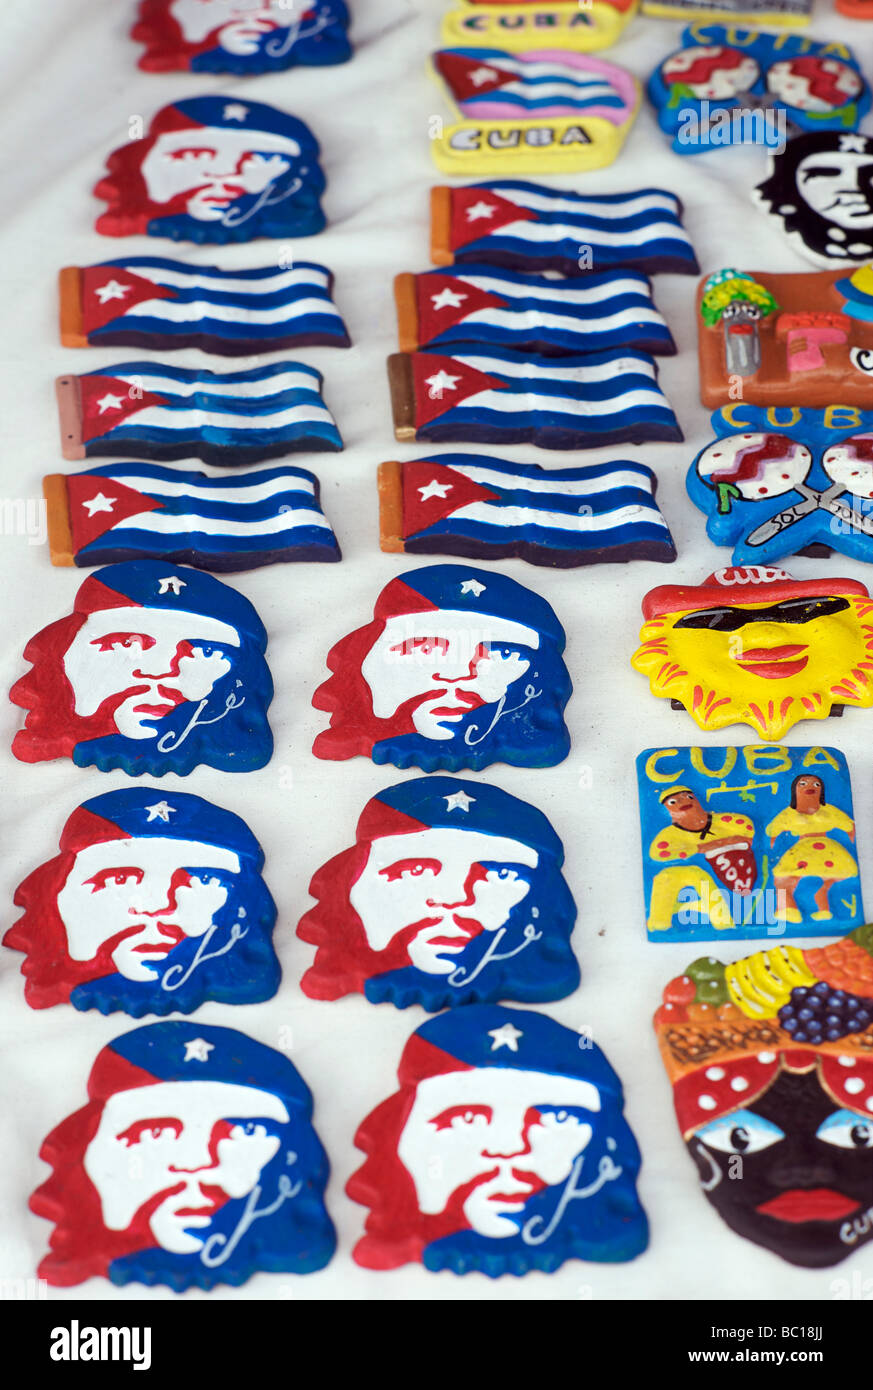 Cuban souvenirs on a market stall, including Che Guevara